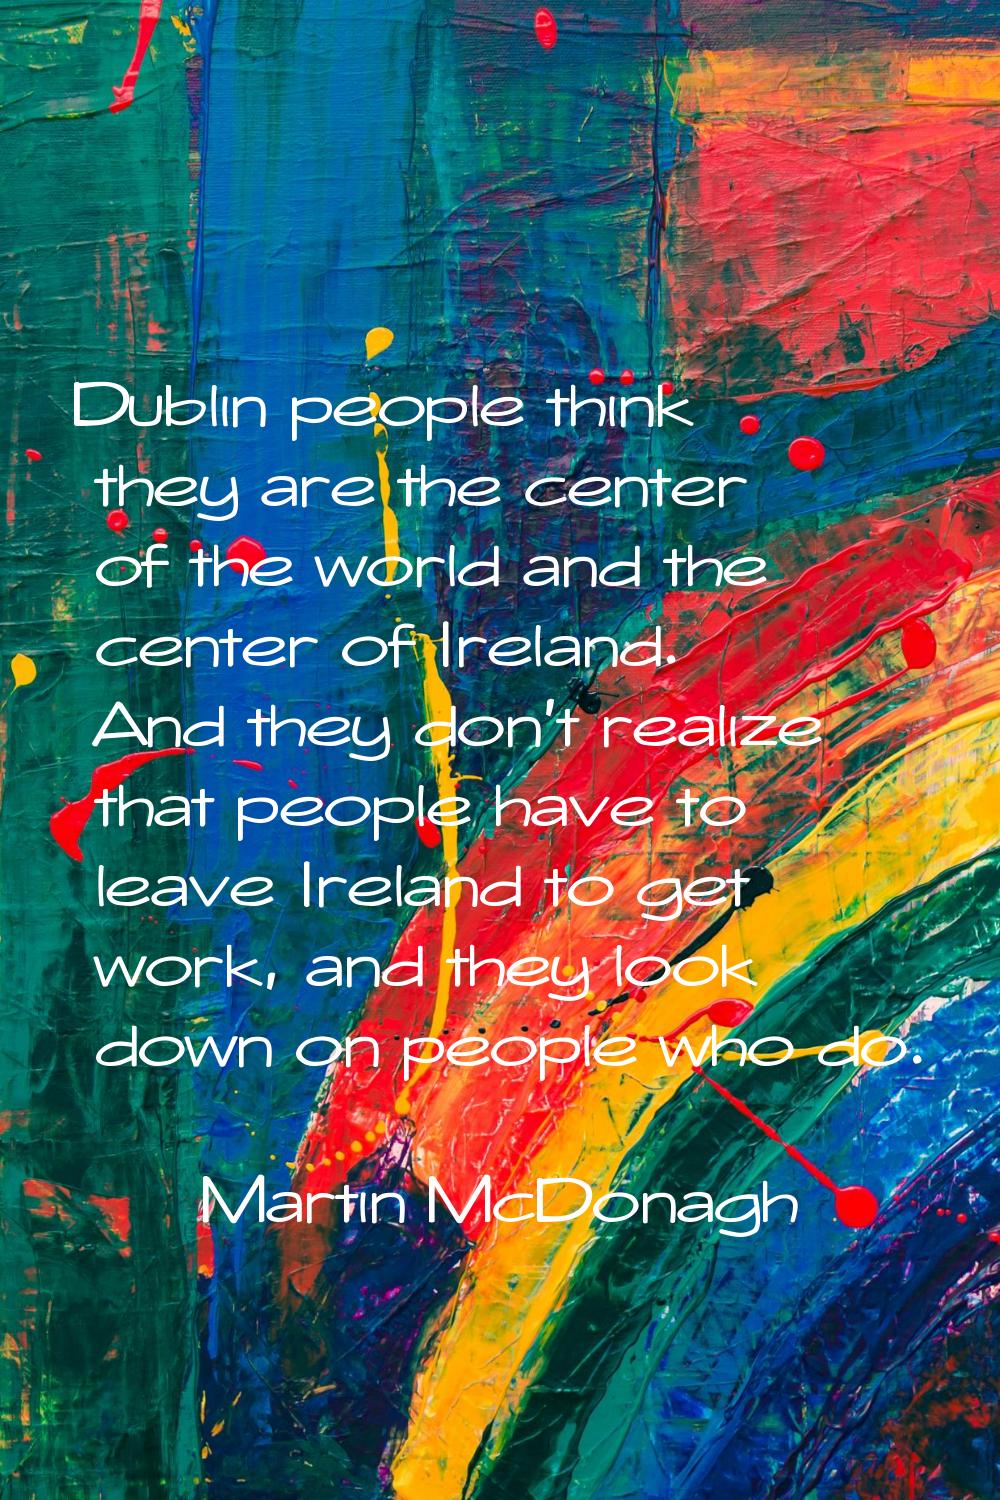 Dublin people think they are the center of the world and the center of Ireland. And they don't real